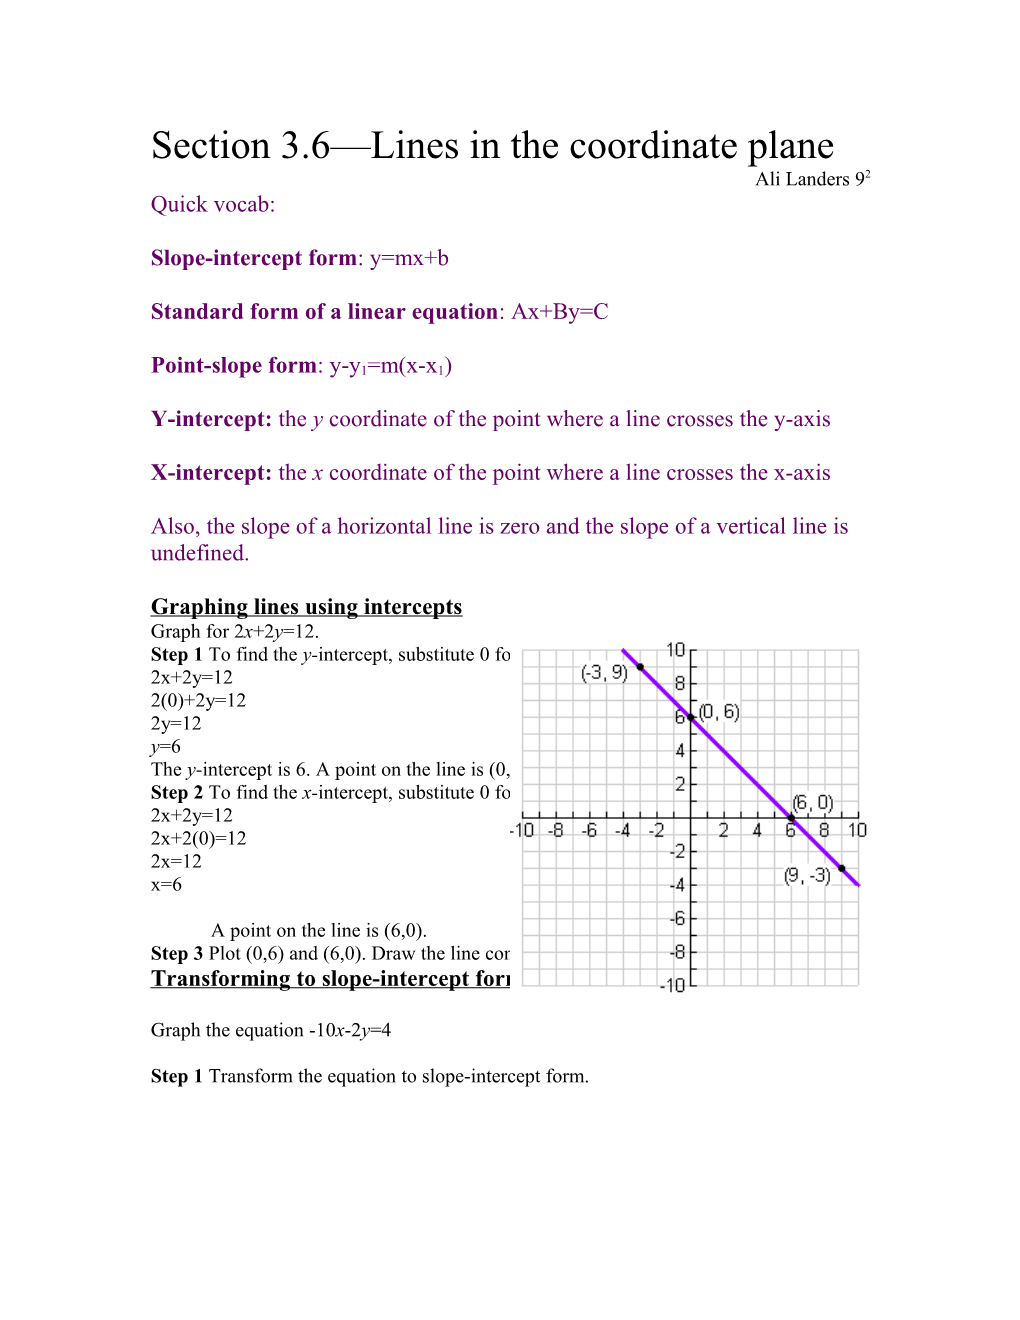 Section 3.6 Lines in the Coordinate Plane